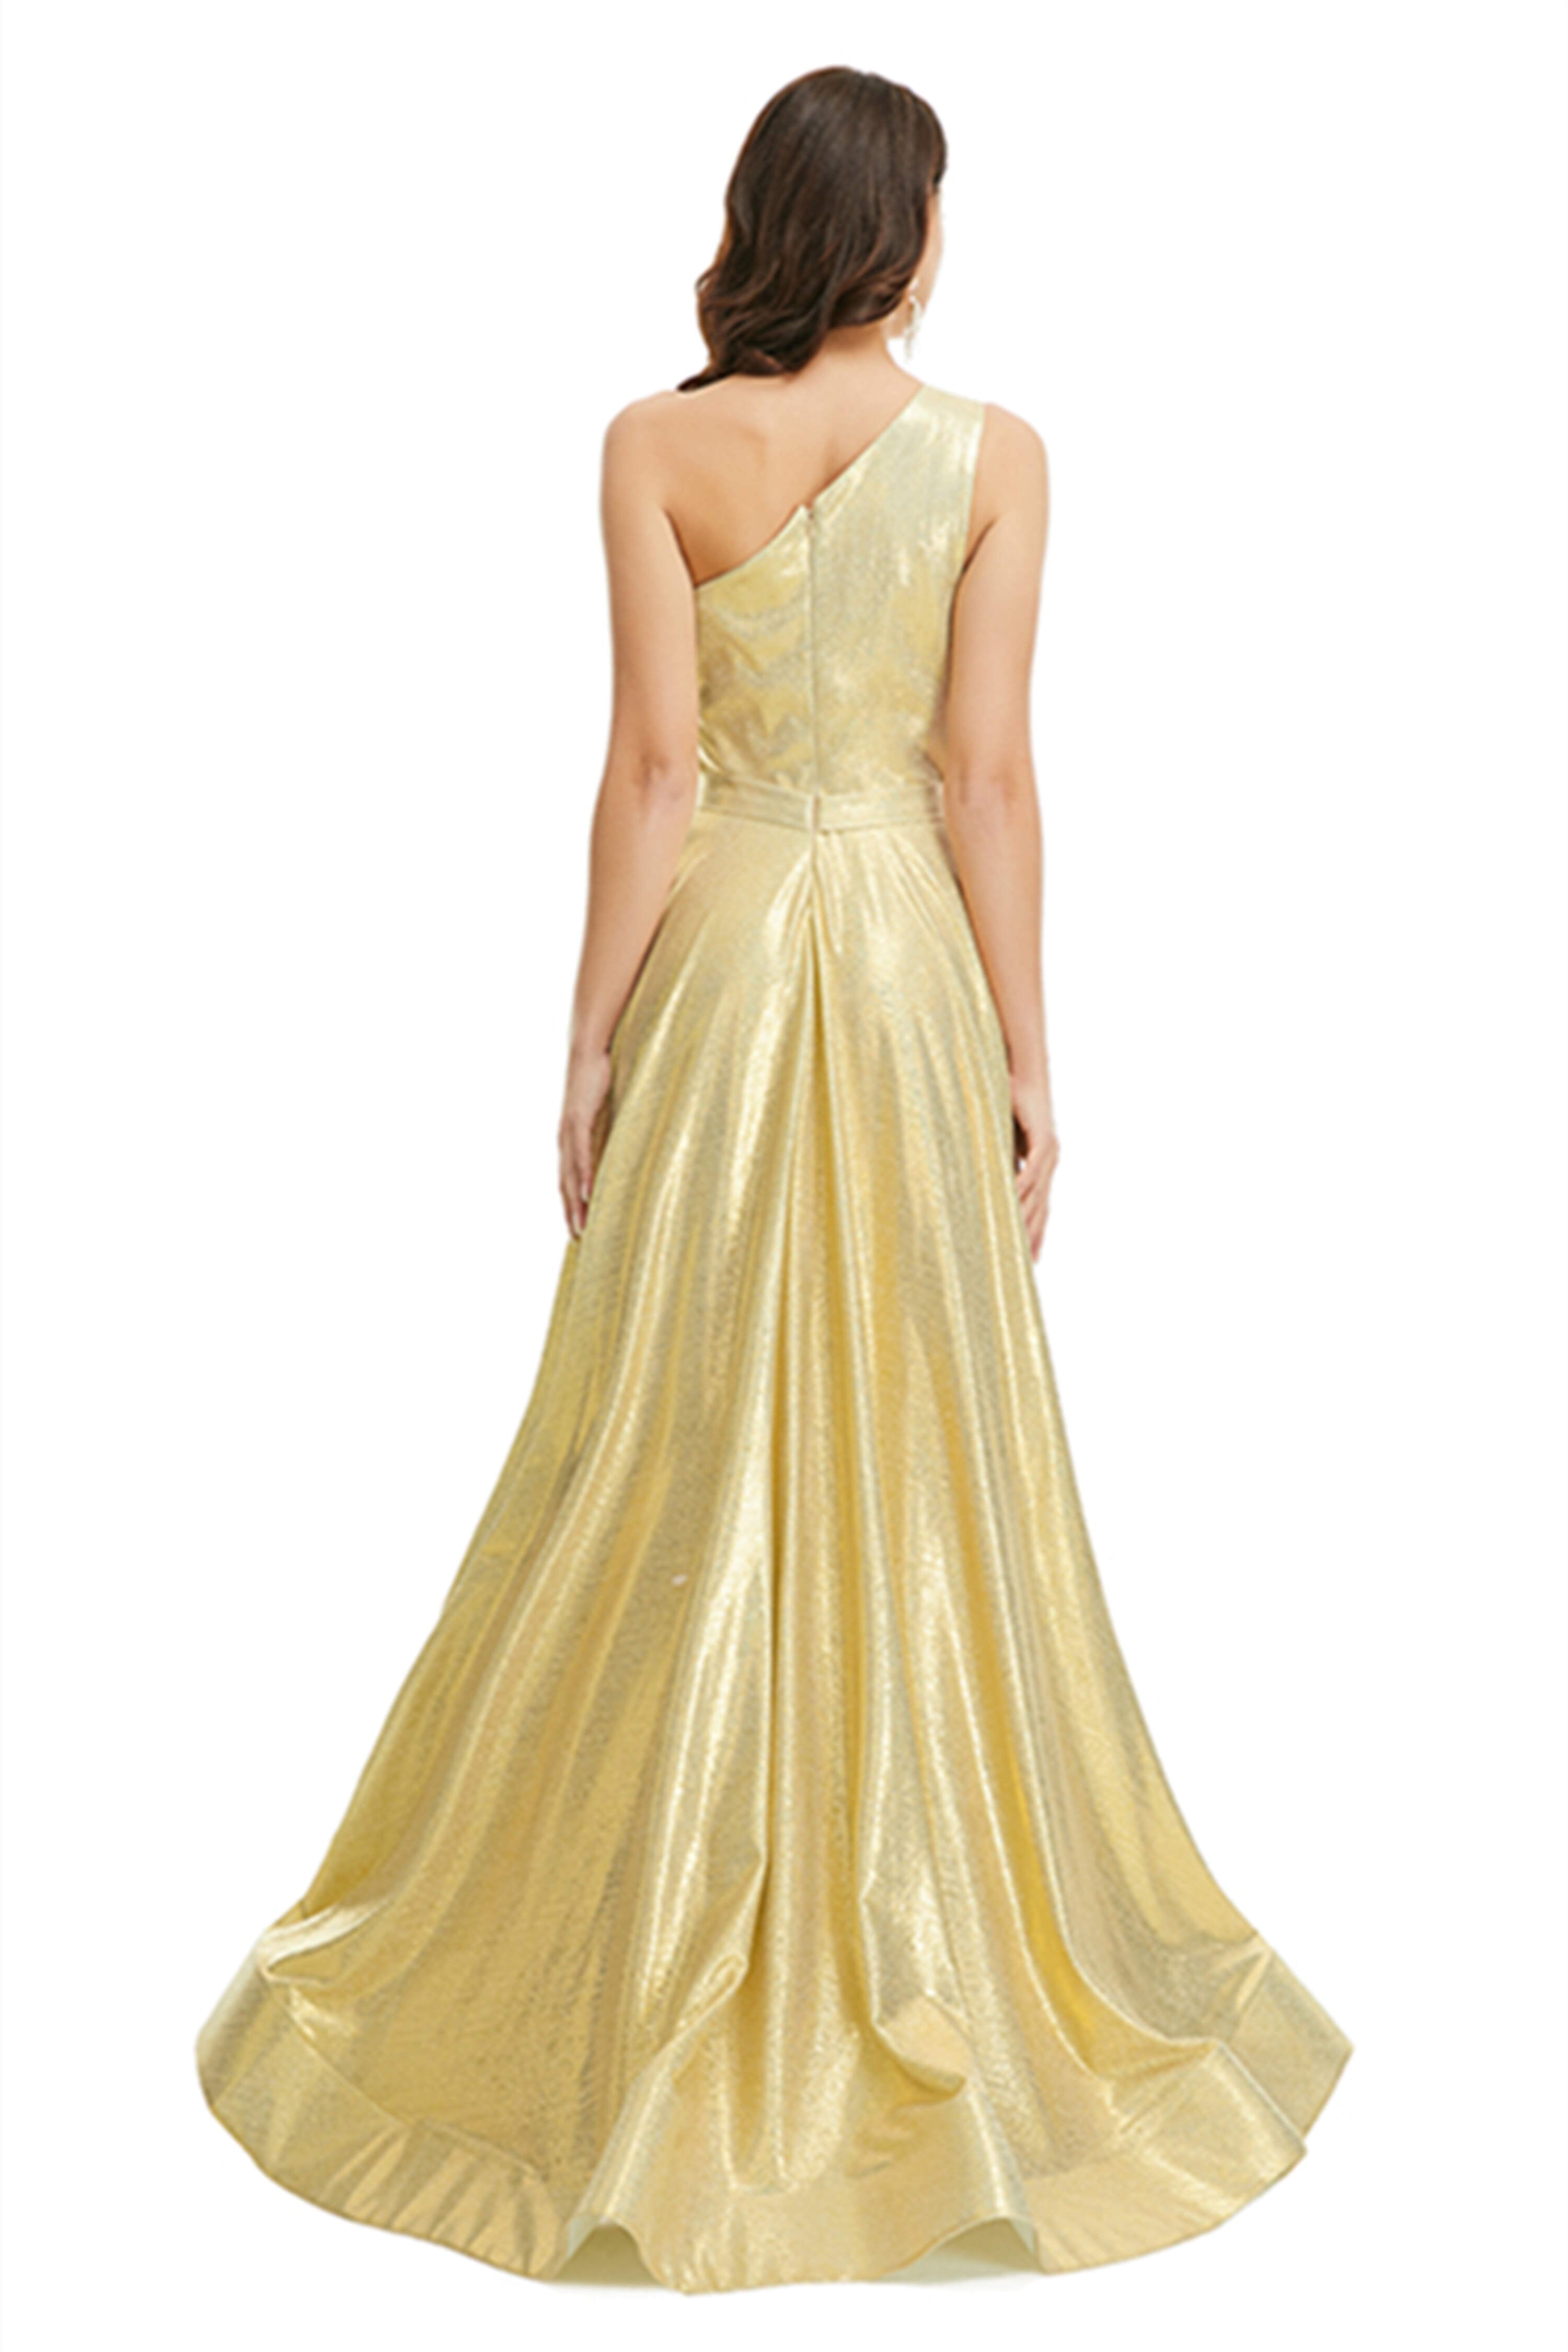 Homecoming Dresses Style, Gold Satin One Shoulder With Split Prom Dresses